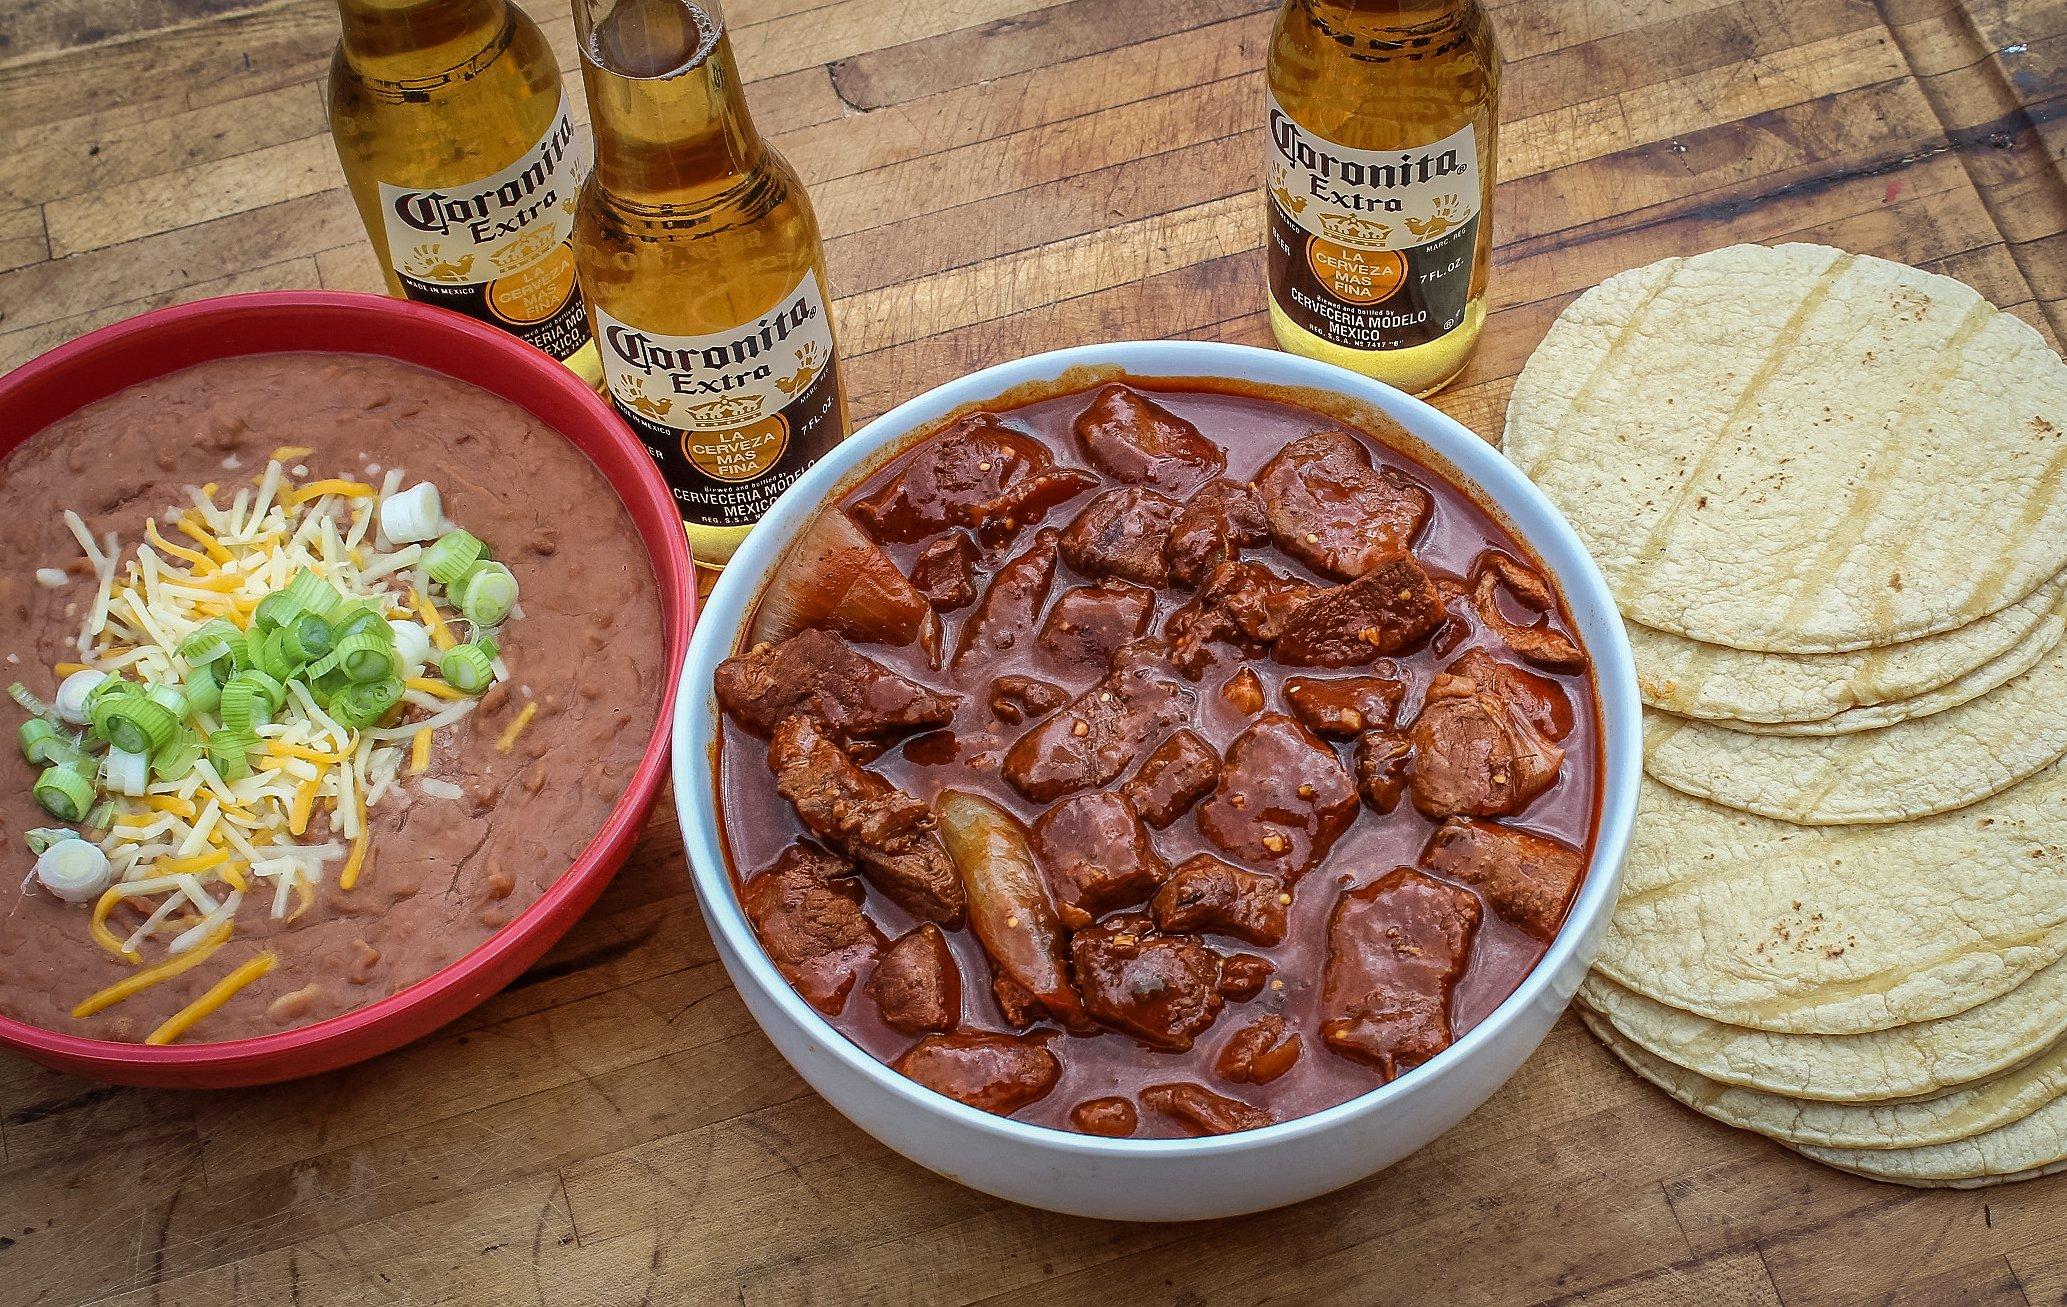 Serve the Chili Colorado with warm tortillas and beans.